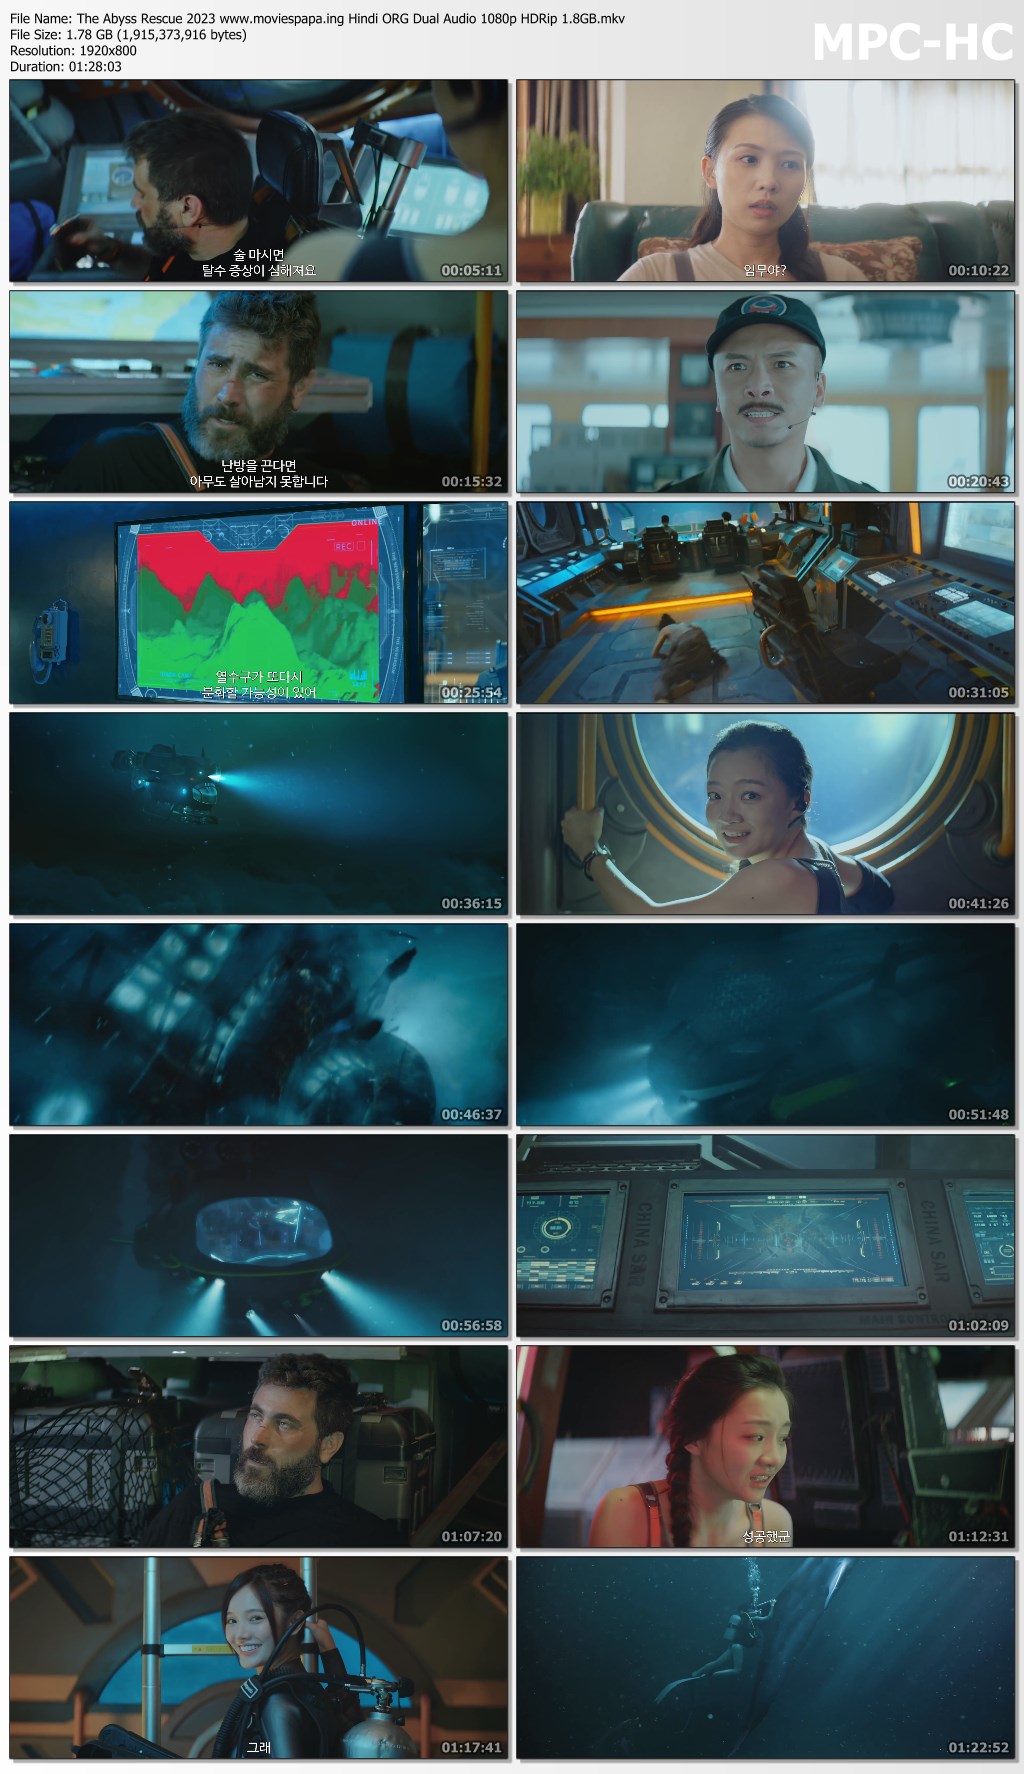 The Abyss Rescue 2023 www.moviespapa.ing Hindi ORG Dual Audio 1080p HDRip 1.8GB.mkv thumbs